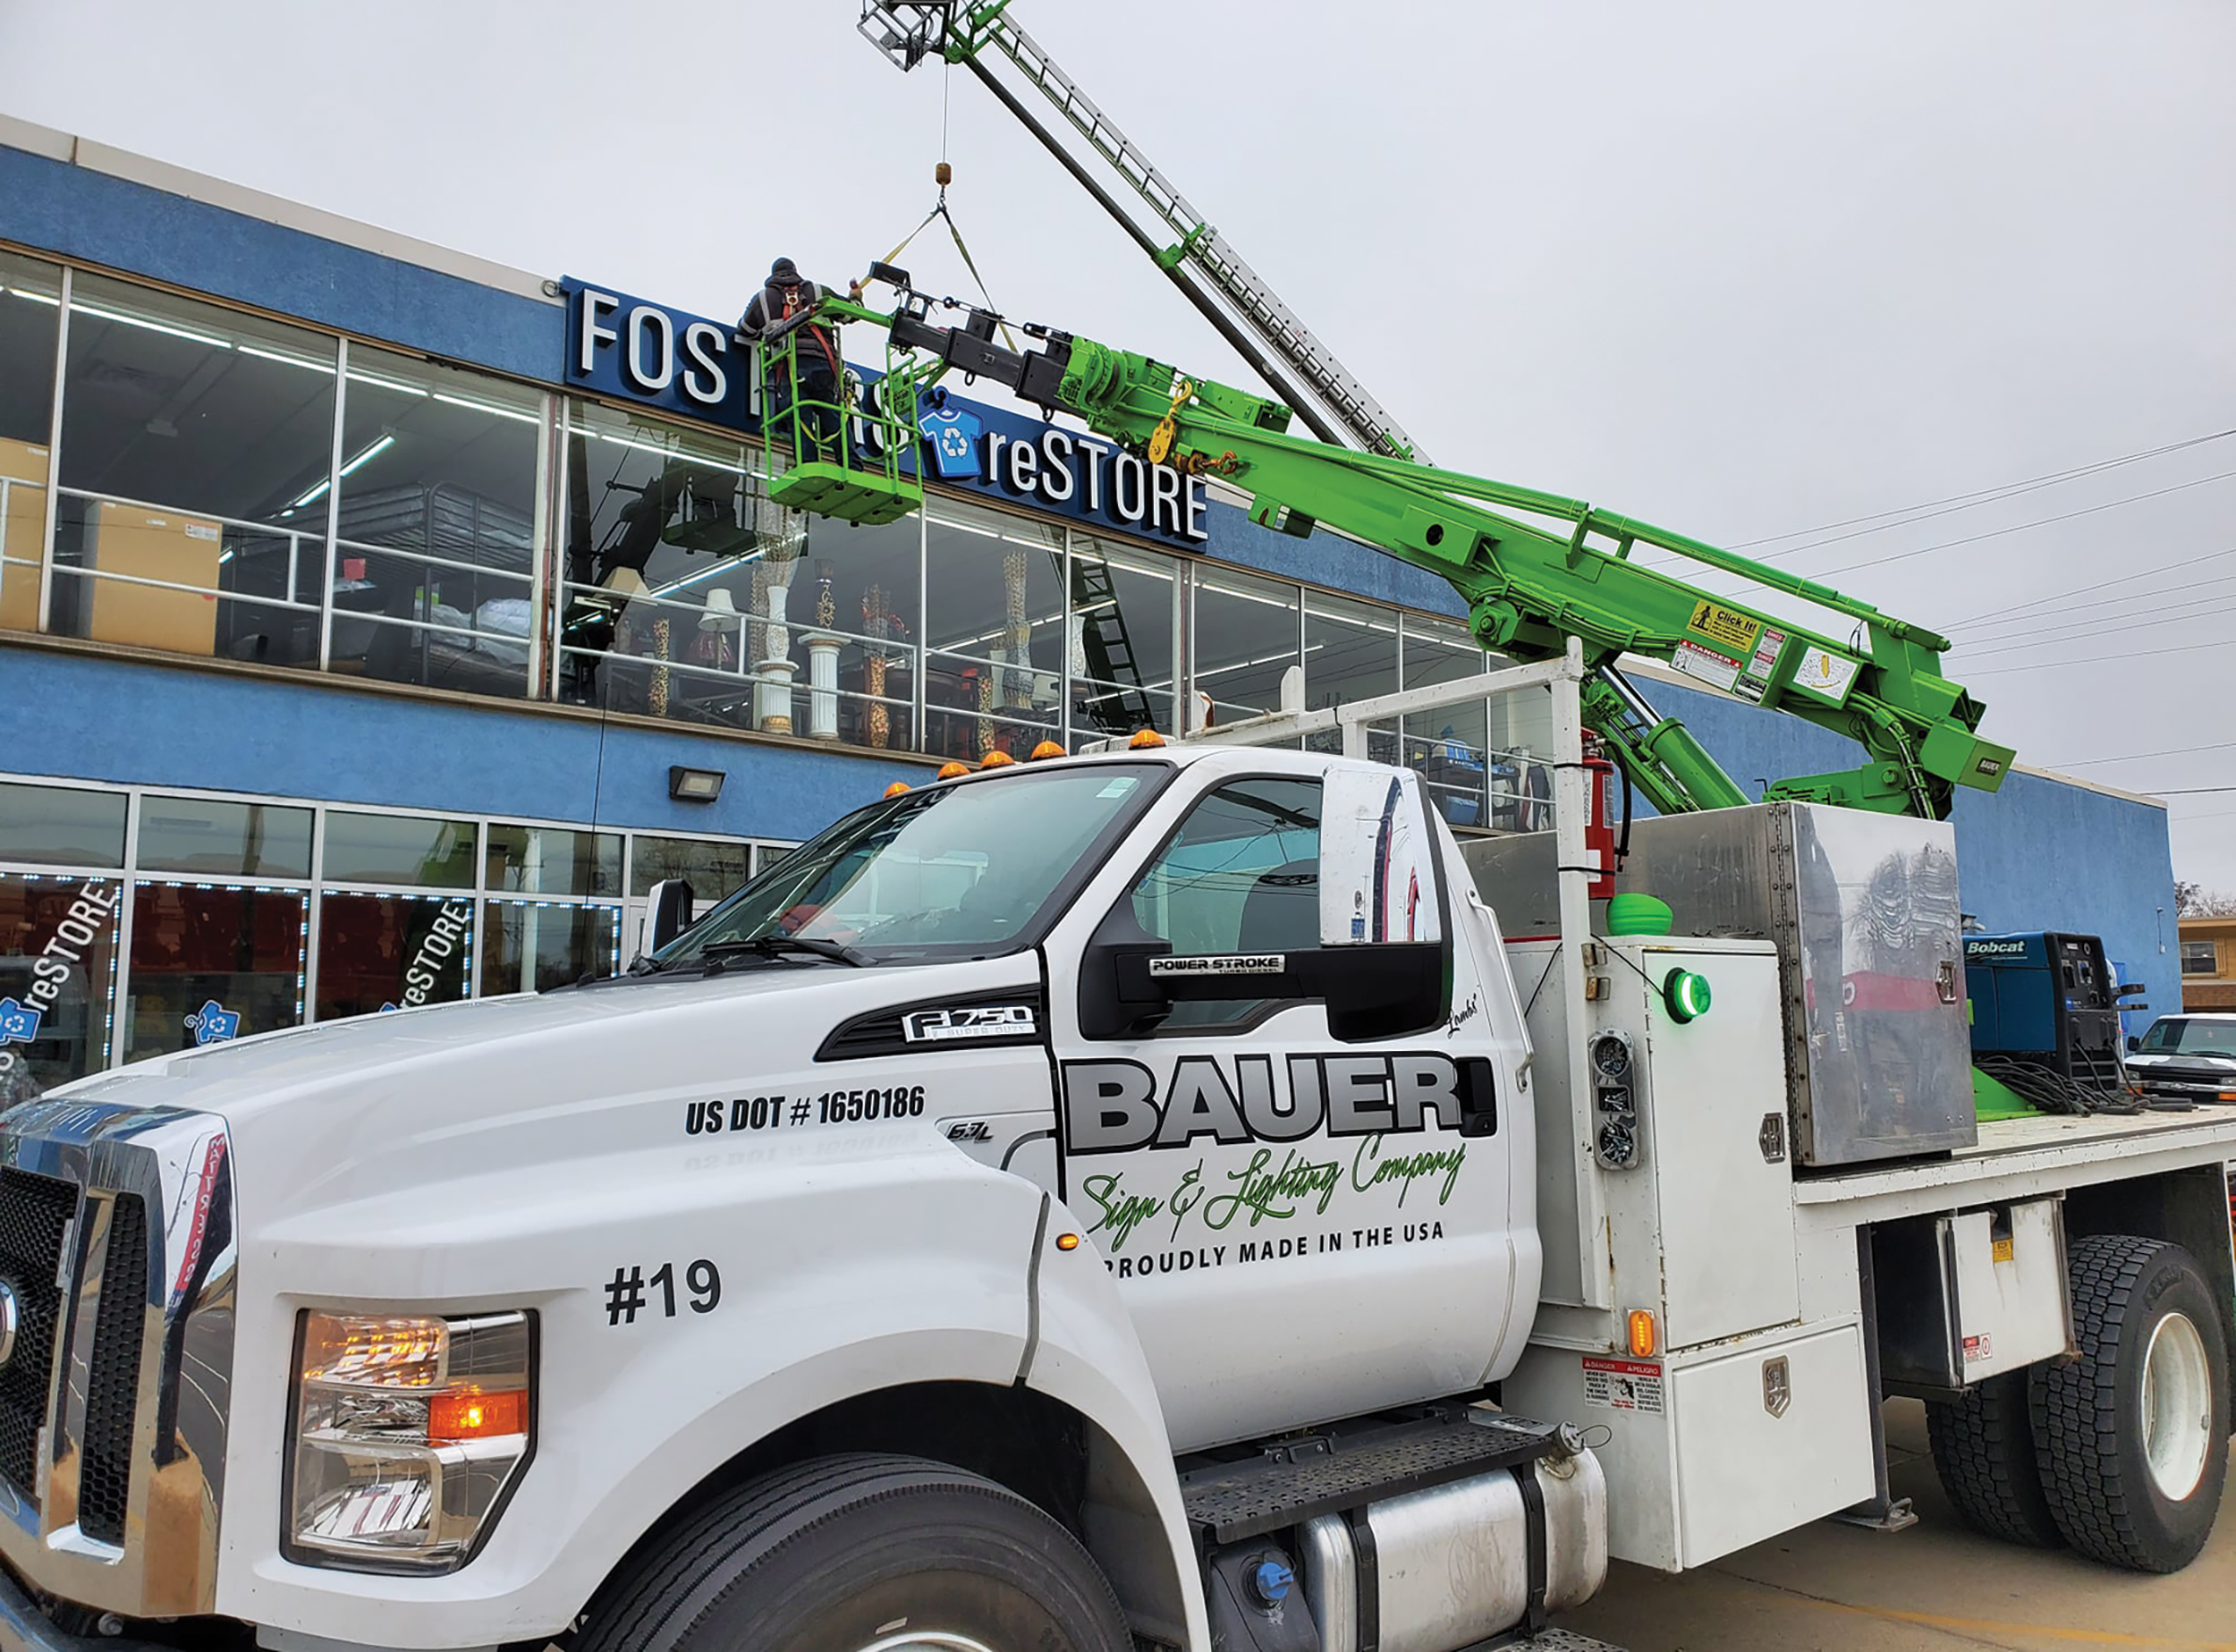 Installing this second-story sign was easy with Bauer Sign's crane and bucket trucks combo.